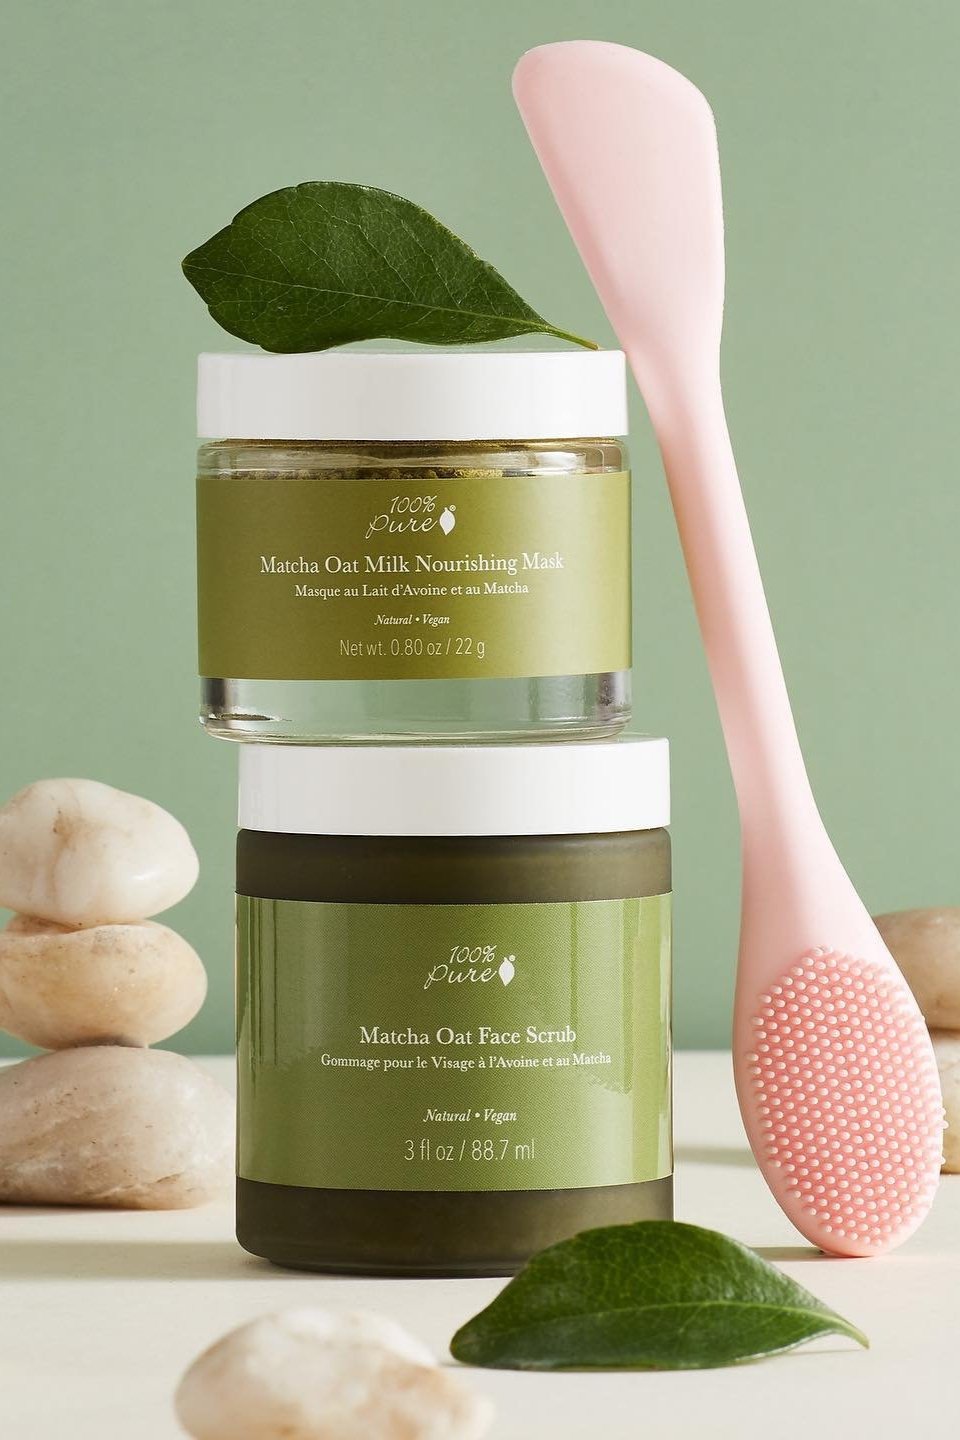 6 Reasons why Natural and Organic Skin Care Products are Better